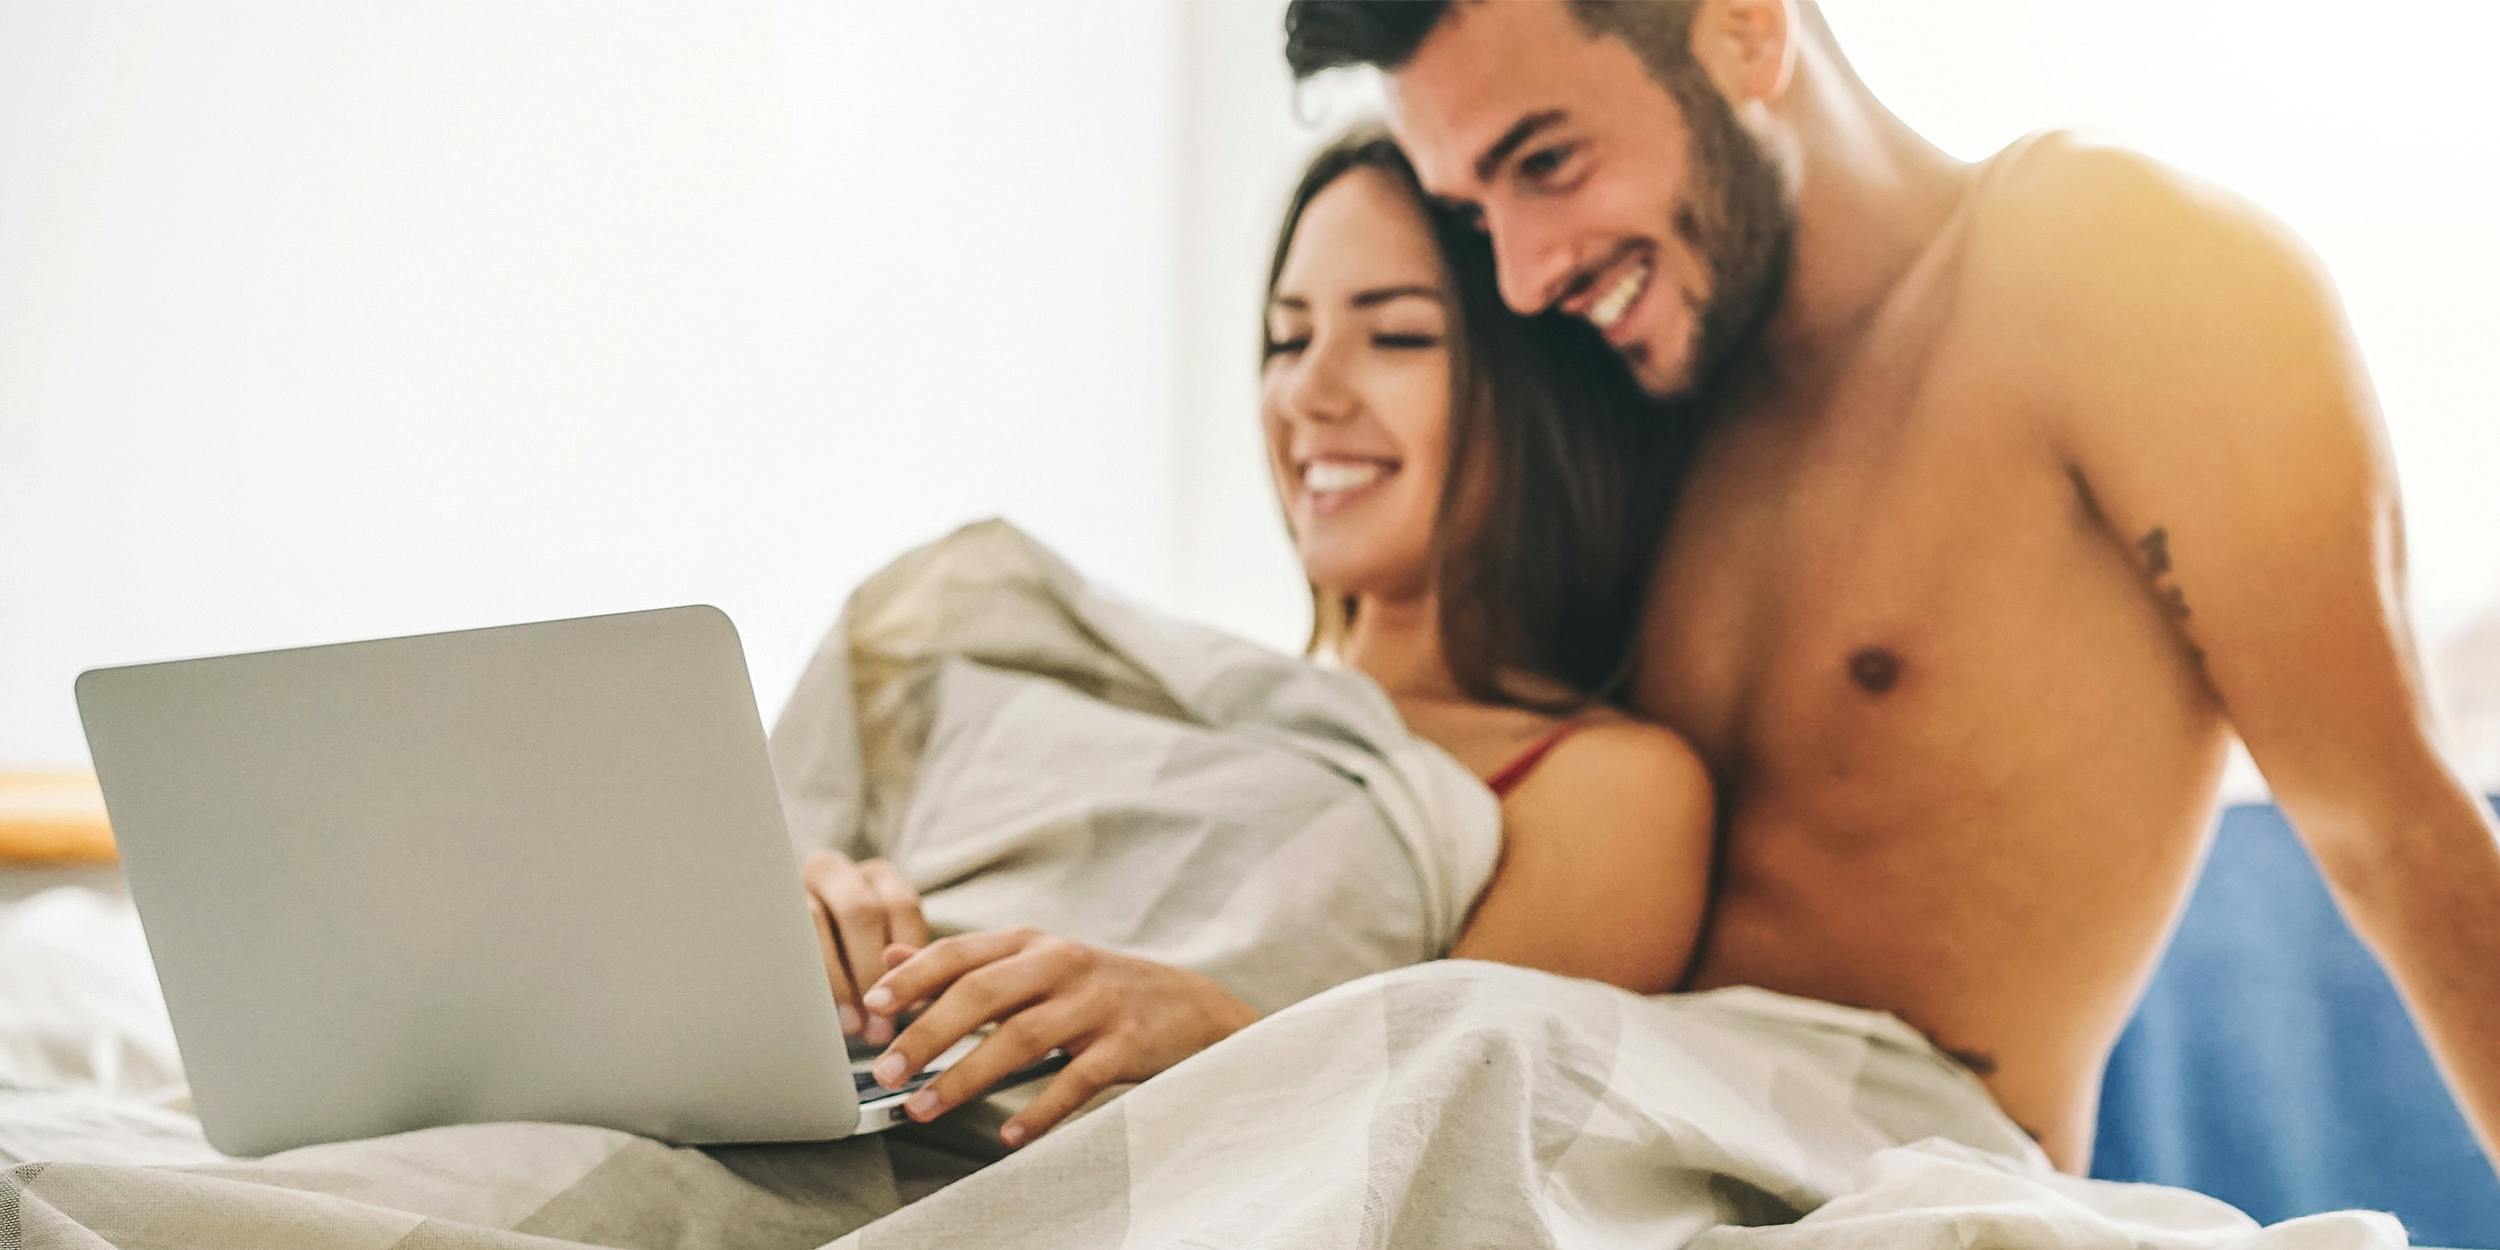 Best porn for couples sites to sexflix and chill to